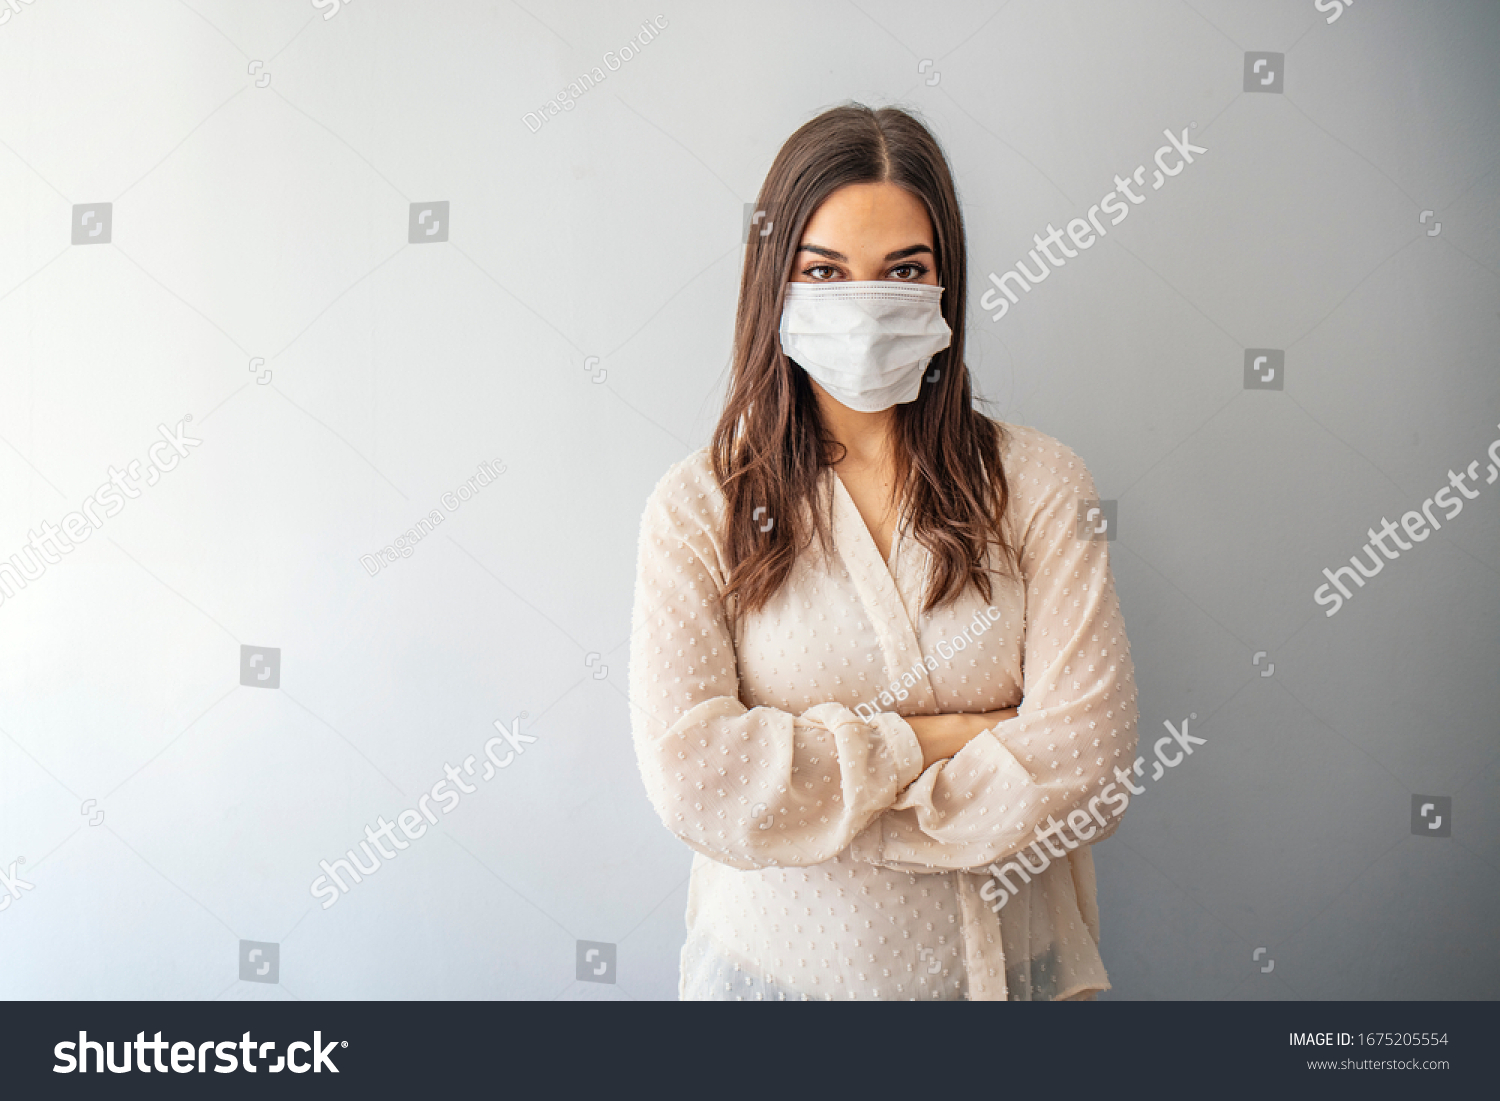 Beautiful young woman in white t-shirt with disposable face mask. Protection versus viruses and infection. Studio portrait, concept with gray background. Woman suffer from sick and wearing face mask. #1675205554